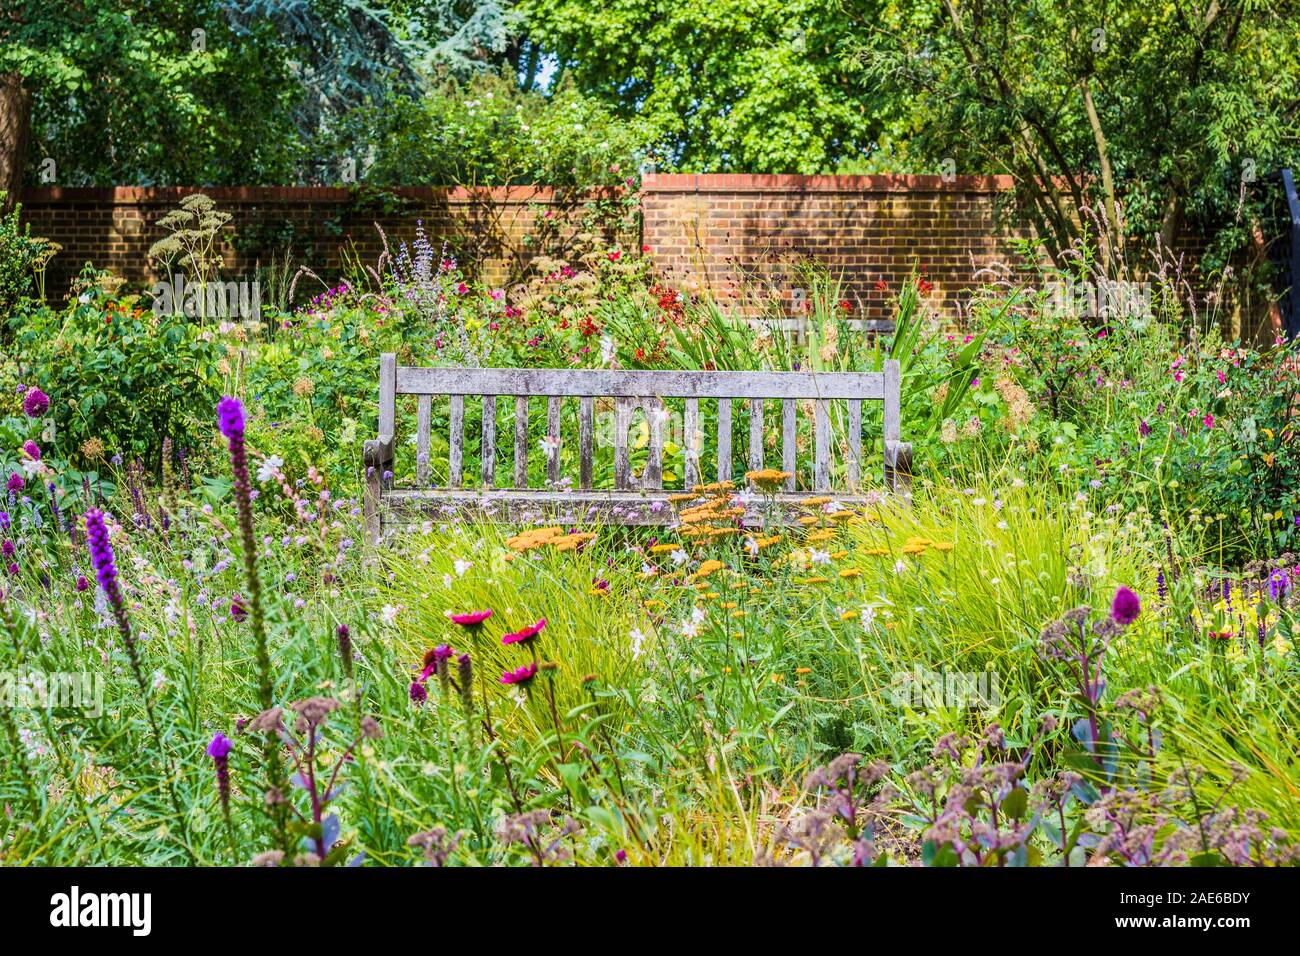 Rustic wooden Bench among a field of wildflowers taken in a walled English Garden Stock Photo